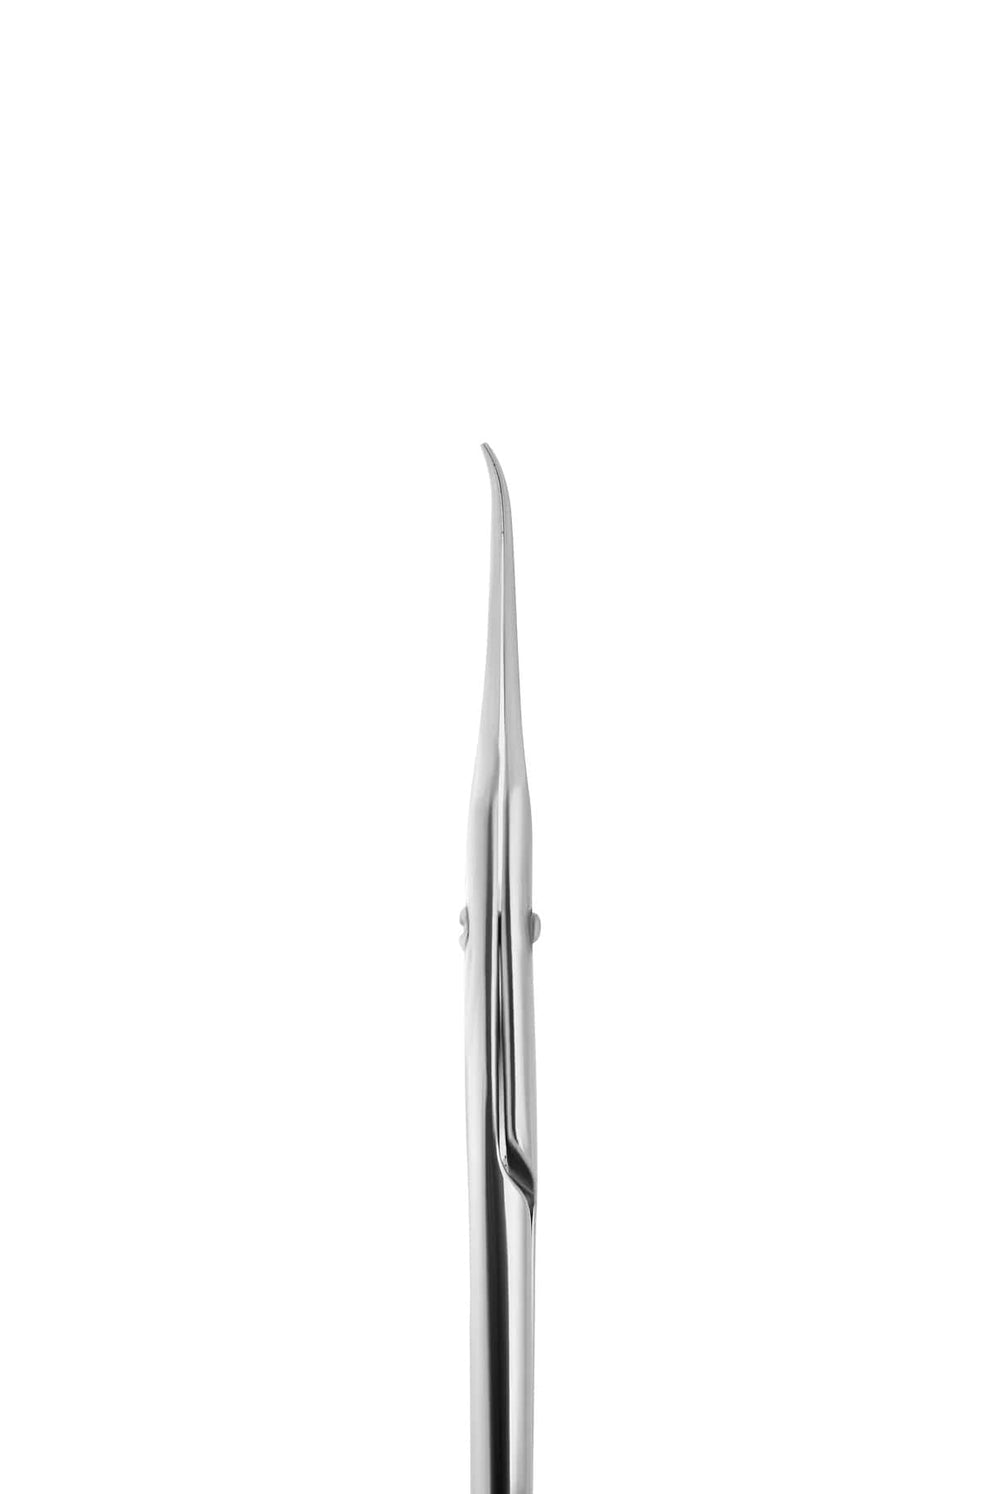 Cuticle Scissors with Curved Blades STALEKS PRO Exclusive 21 Type 2, 21 mm